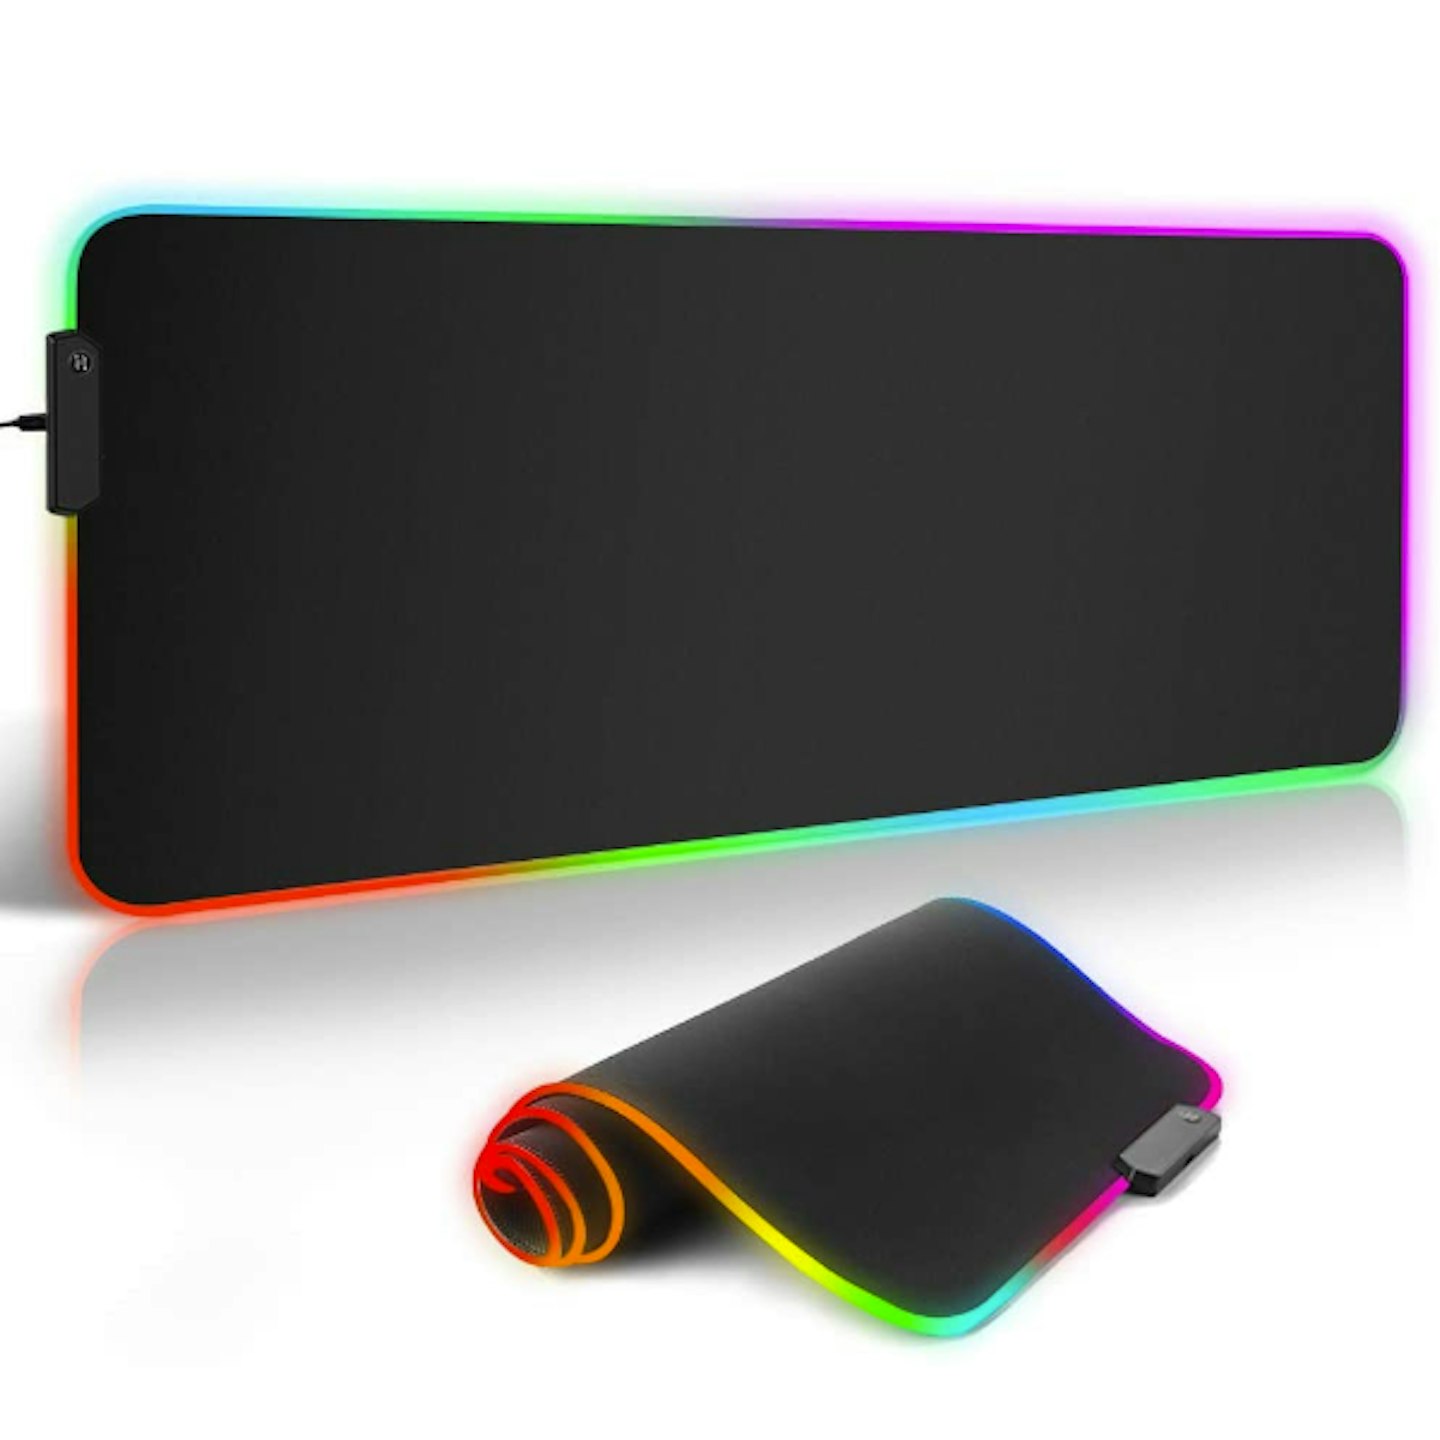 Archeer RGB Gaming Mouse Mat